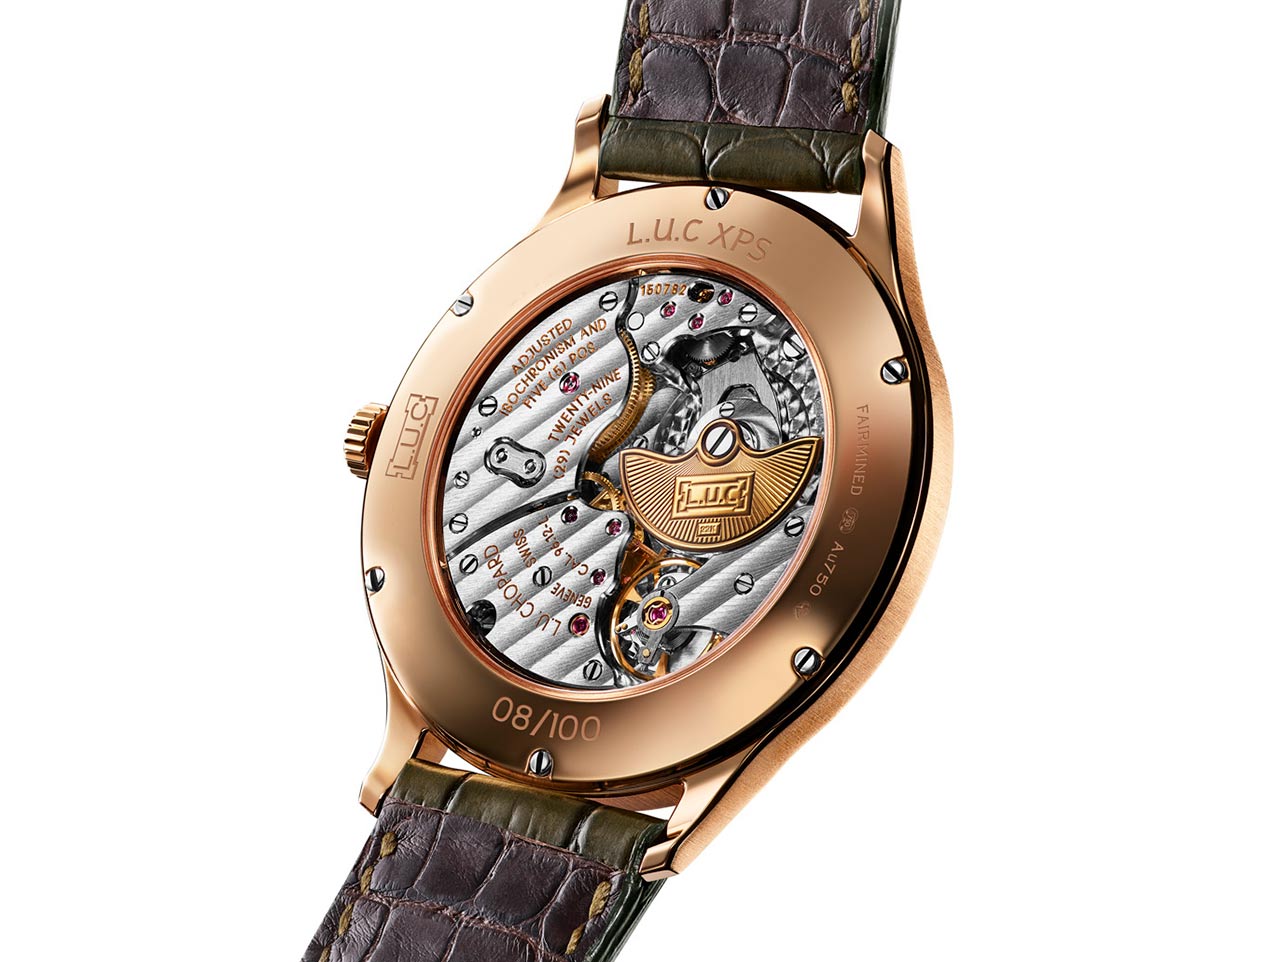 Chopard - L.U.C XPS Spirit of Nature | Time and Watches | The watch blog